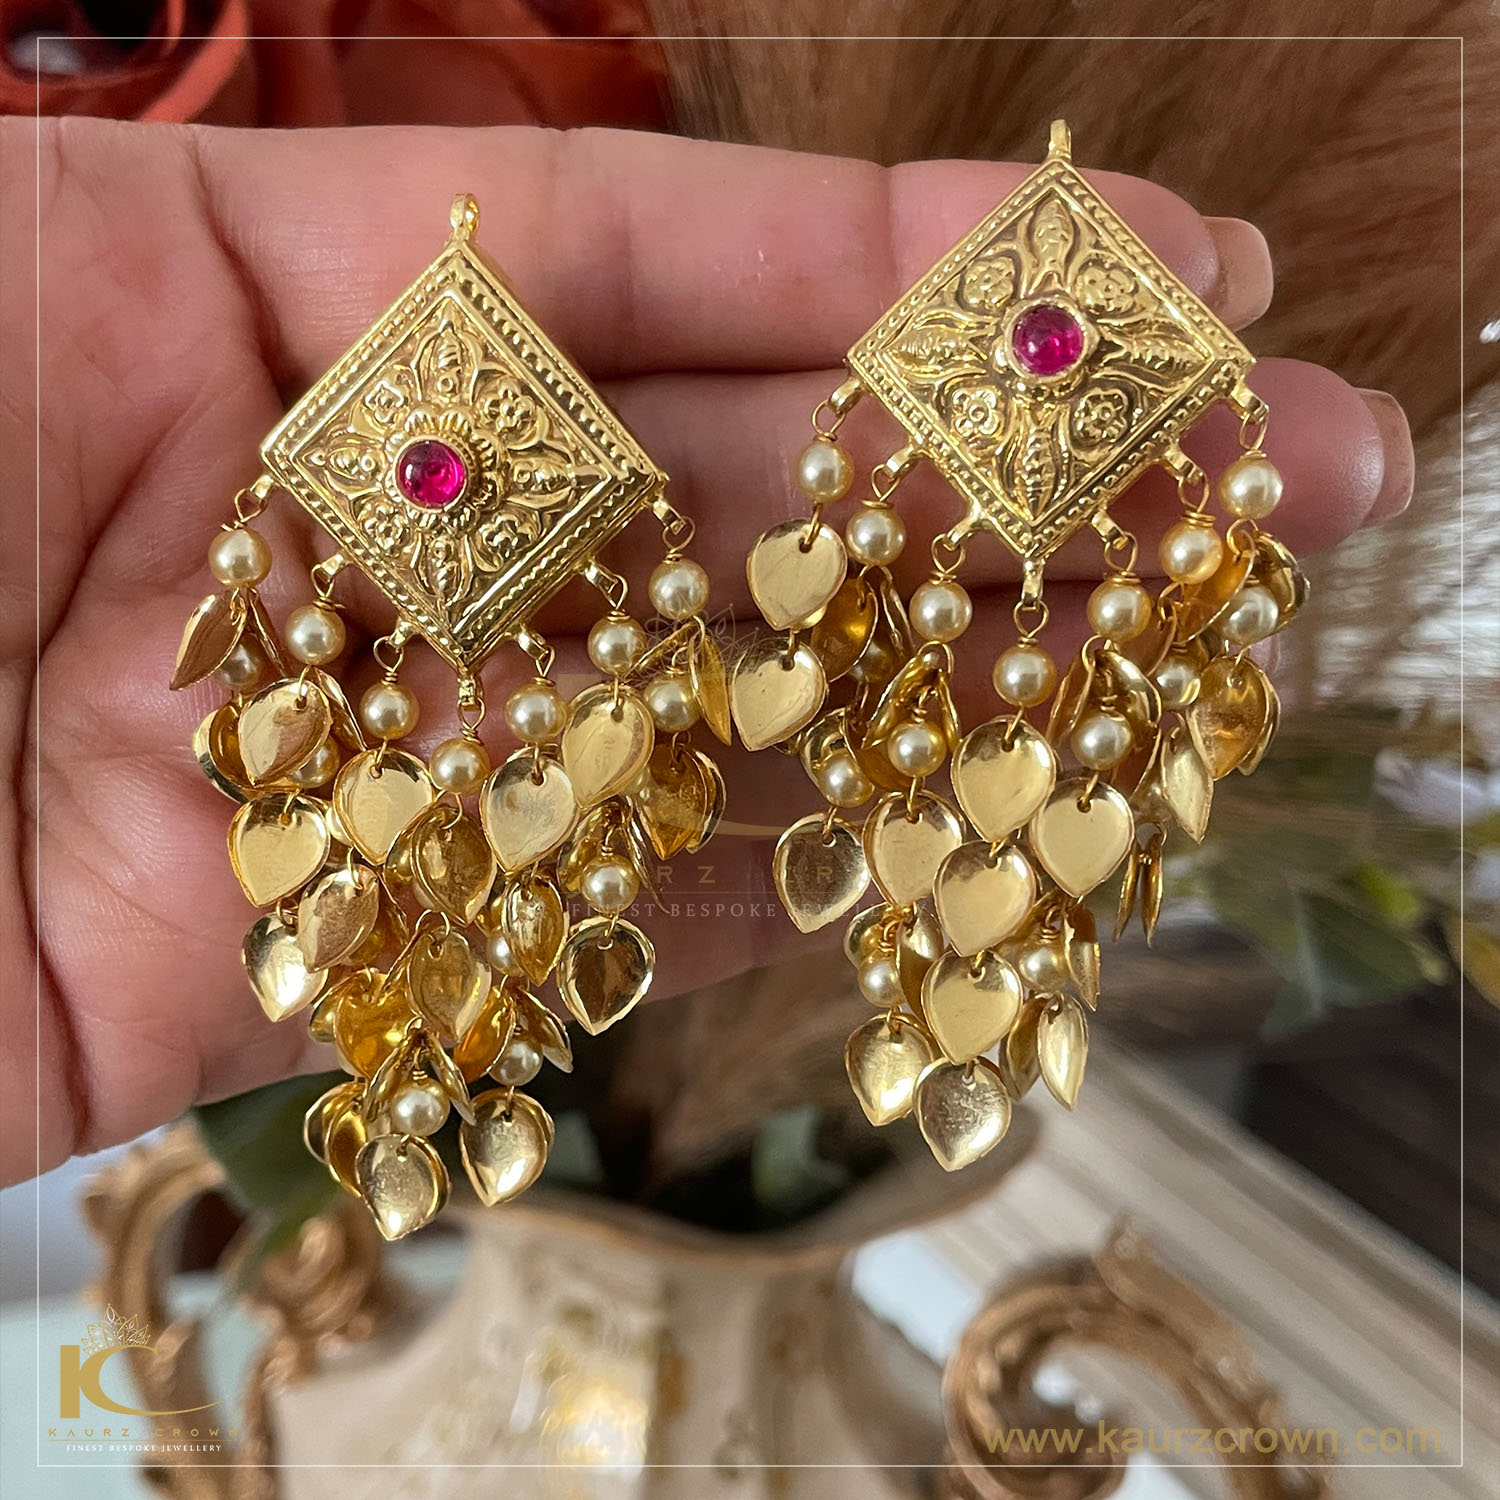 3,4 gm gold plated earrings | Bridal gold jewellery designs, Gold jewellry  designs, Gold earrings models